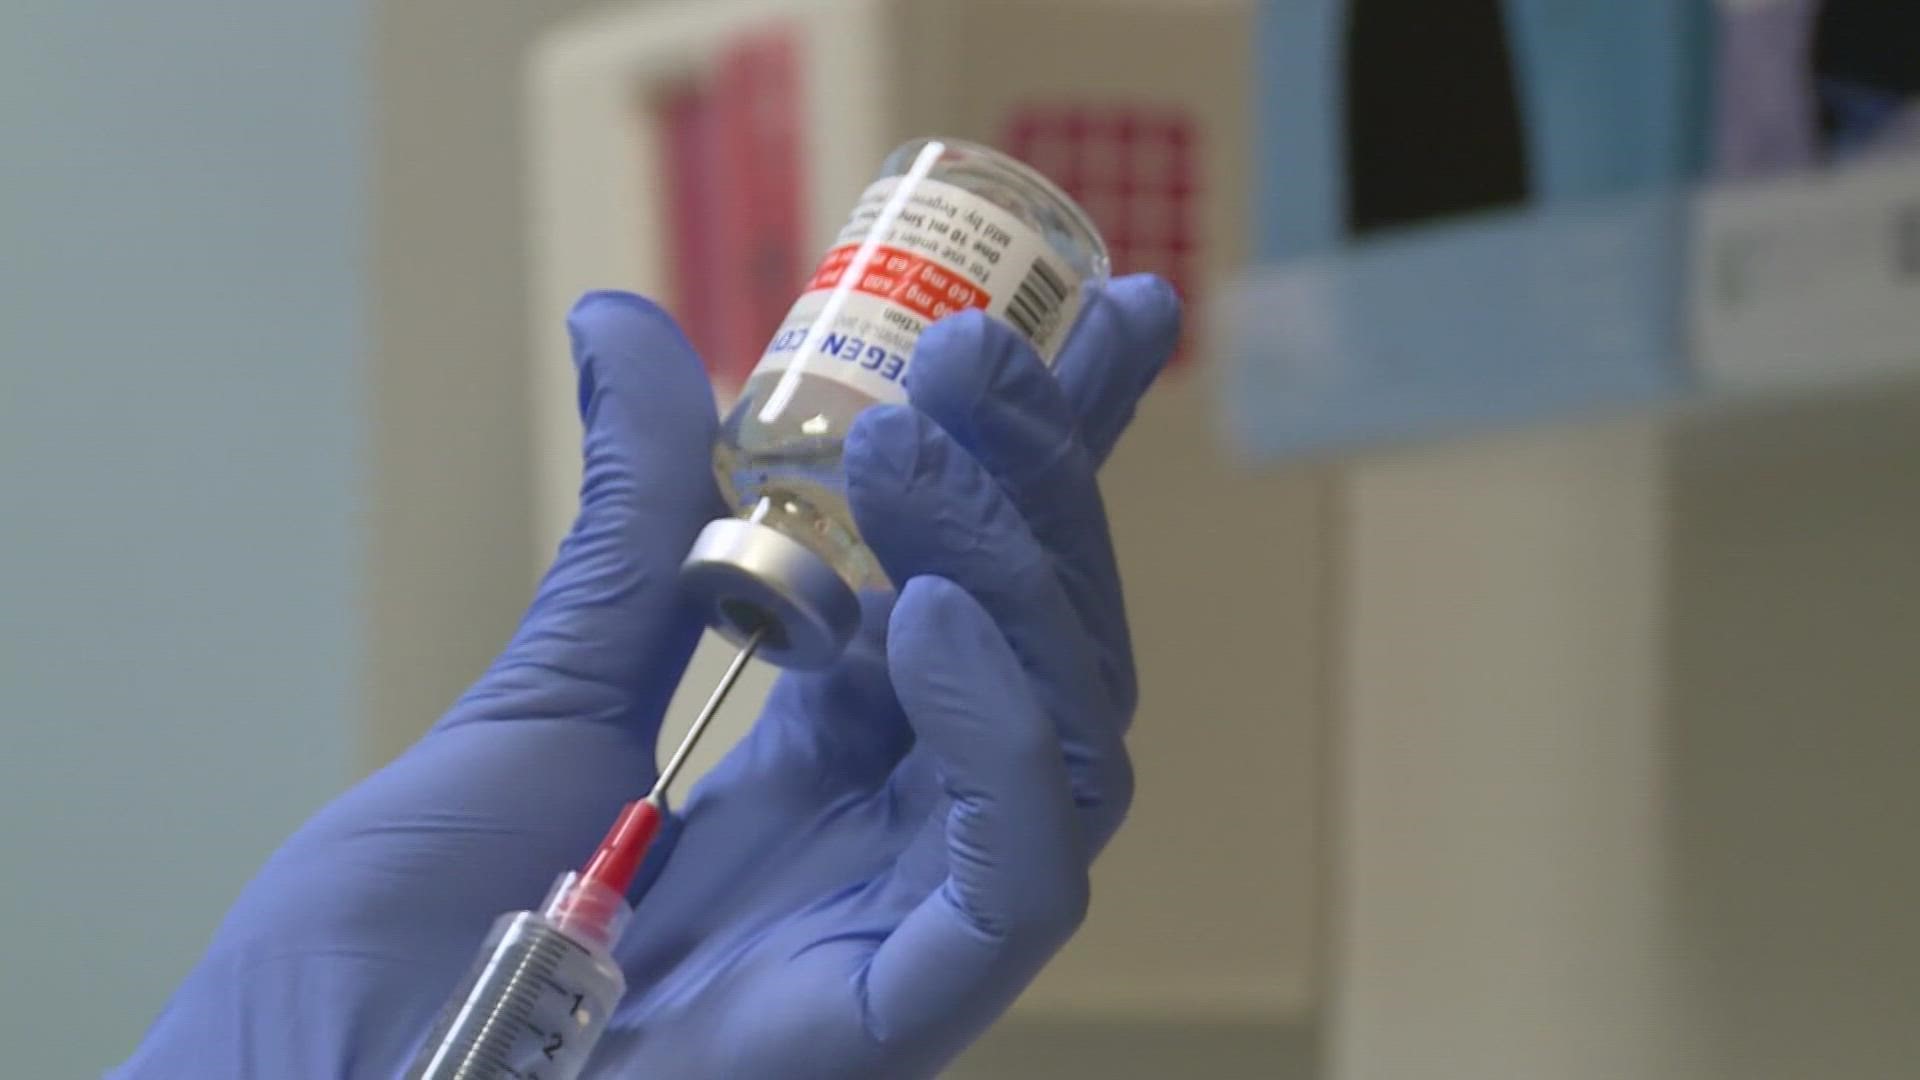 Houston Methodist is giving IV antibody infusions to people who test positive and preventative shots to anyone exposed to the virus.